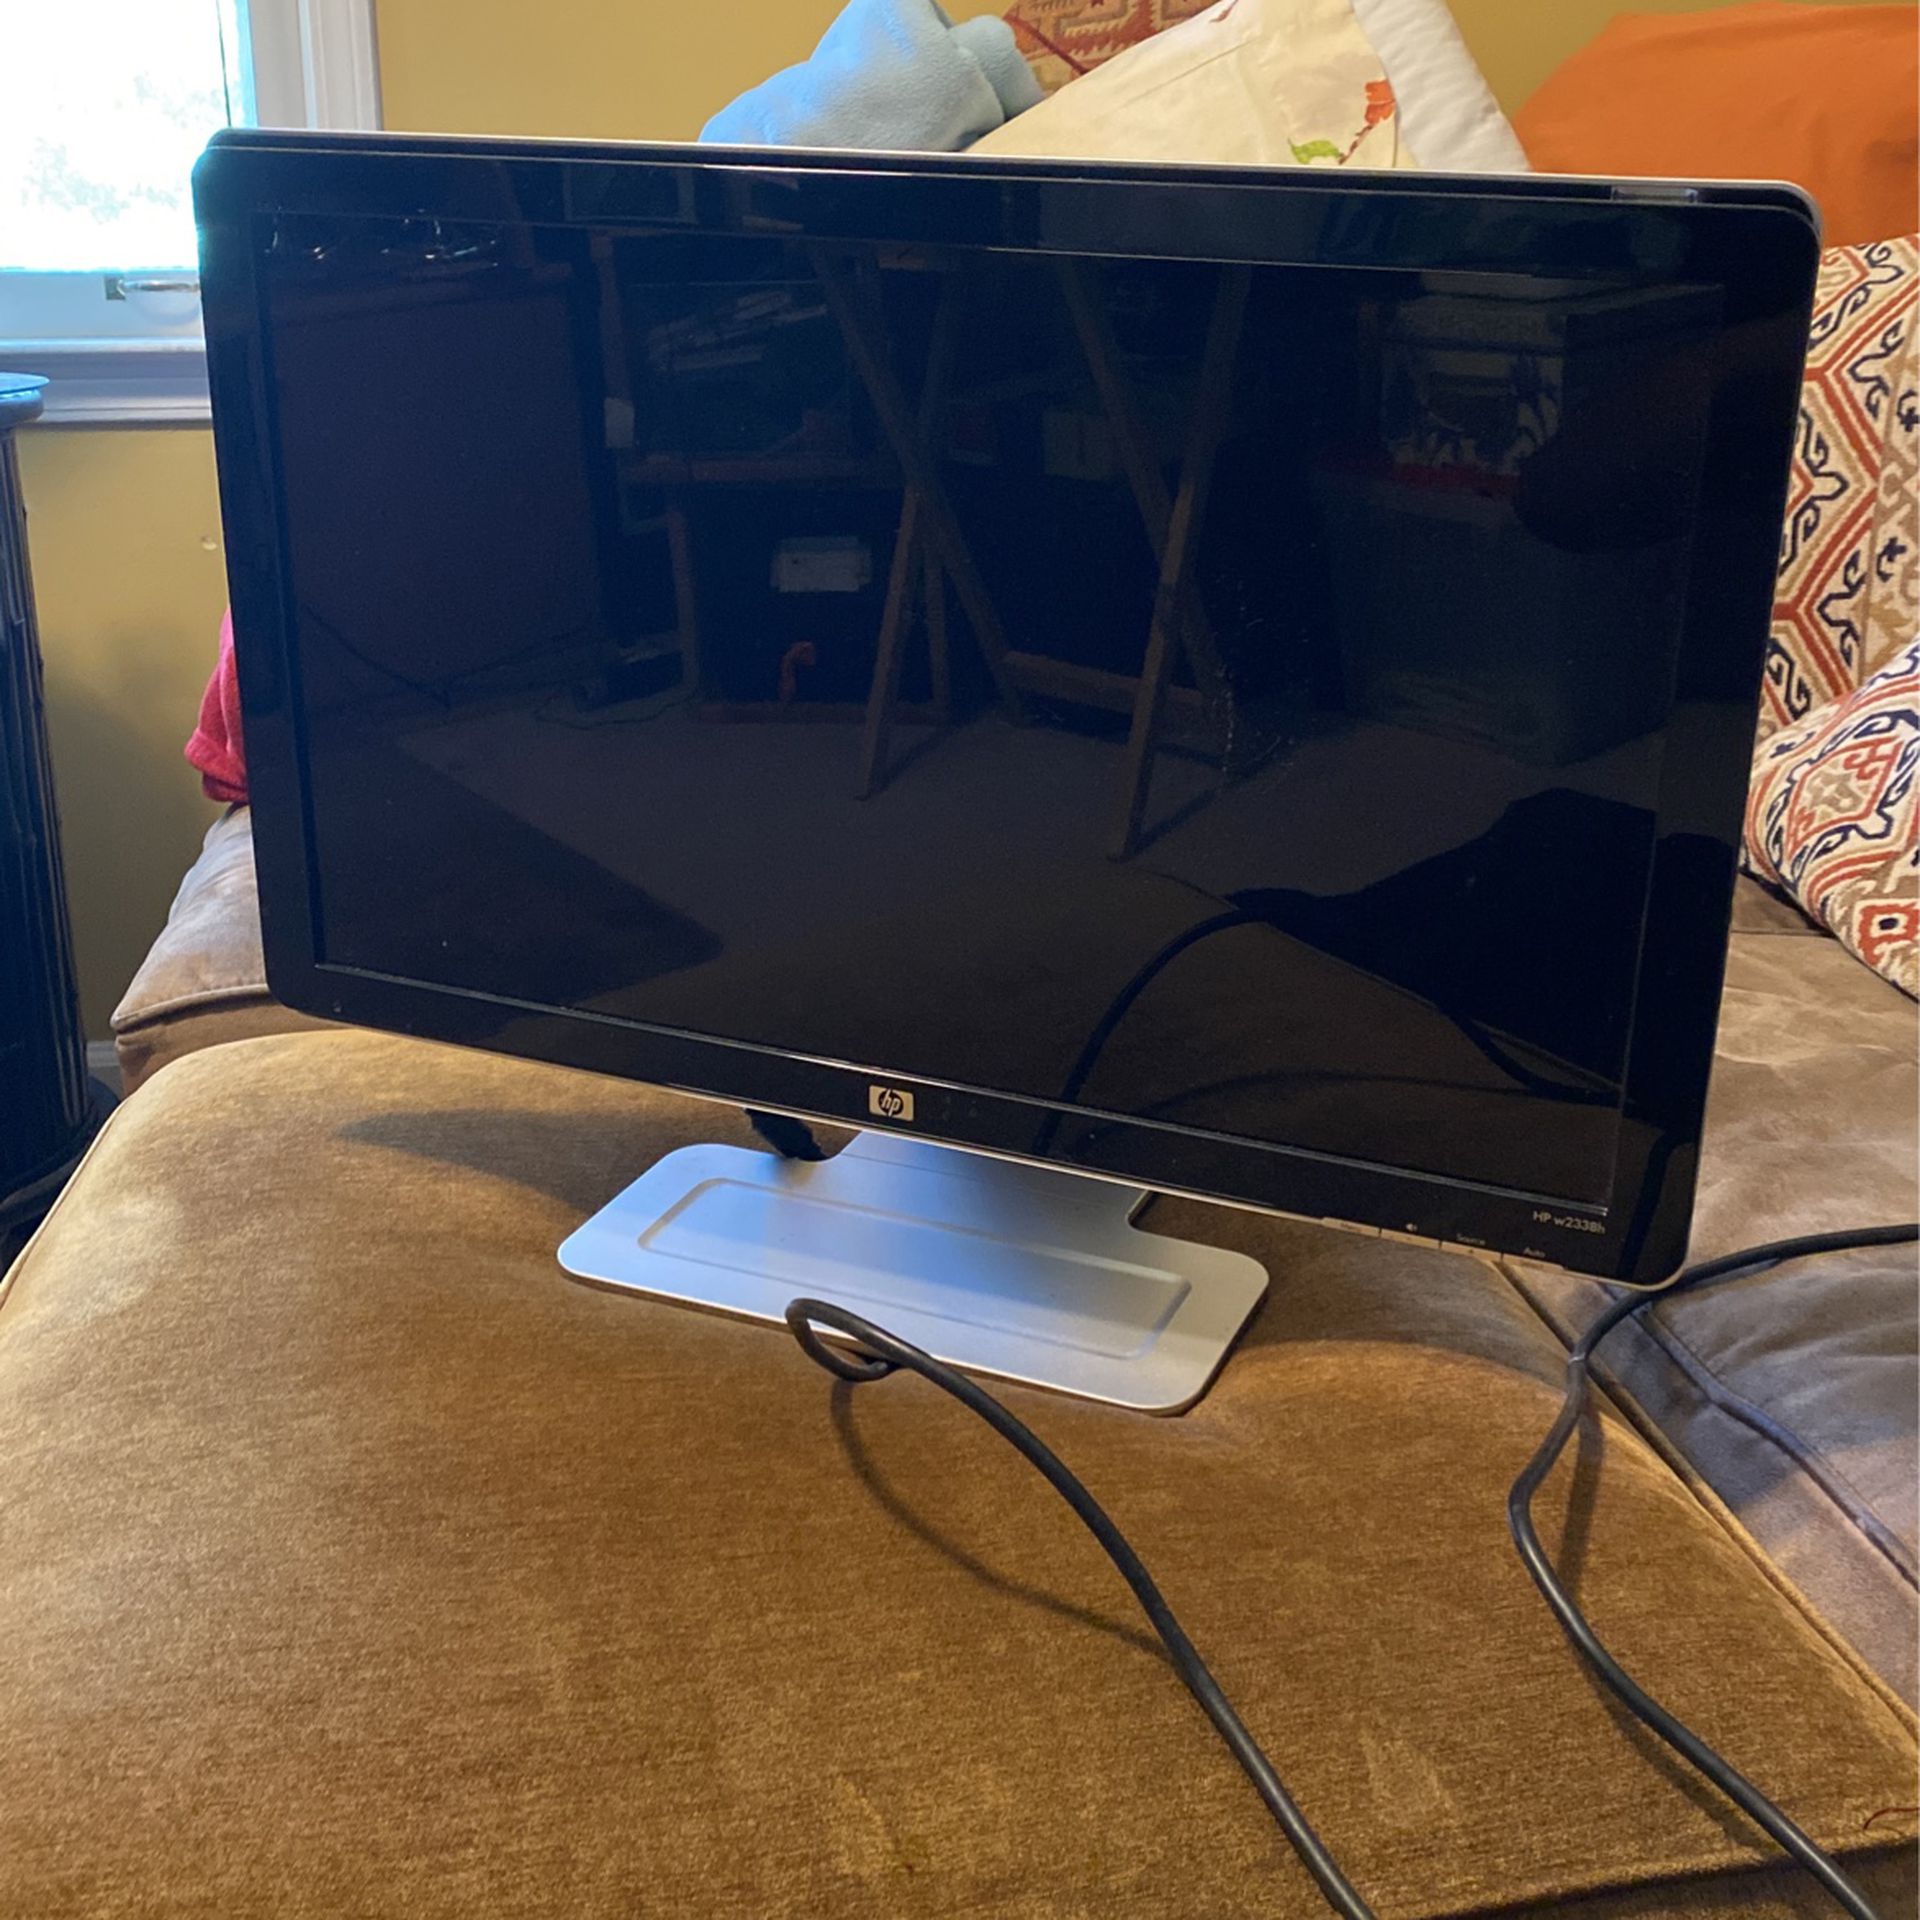 23” in. LCD HP Computer Monitor 